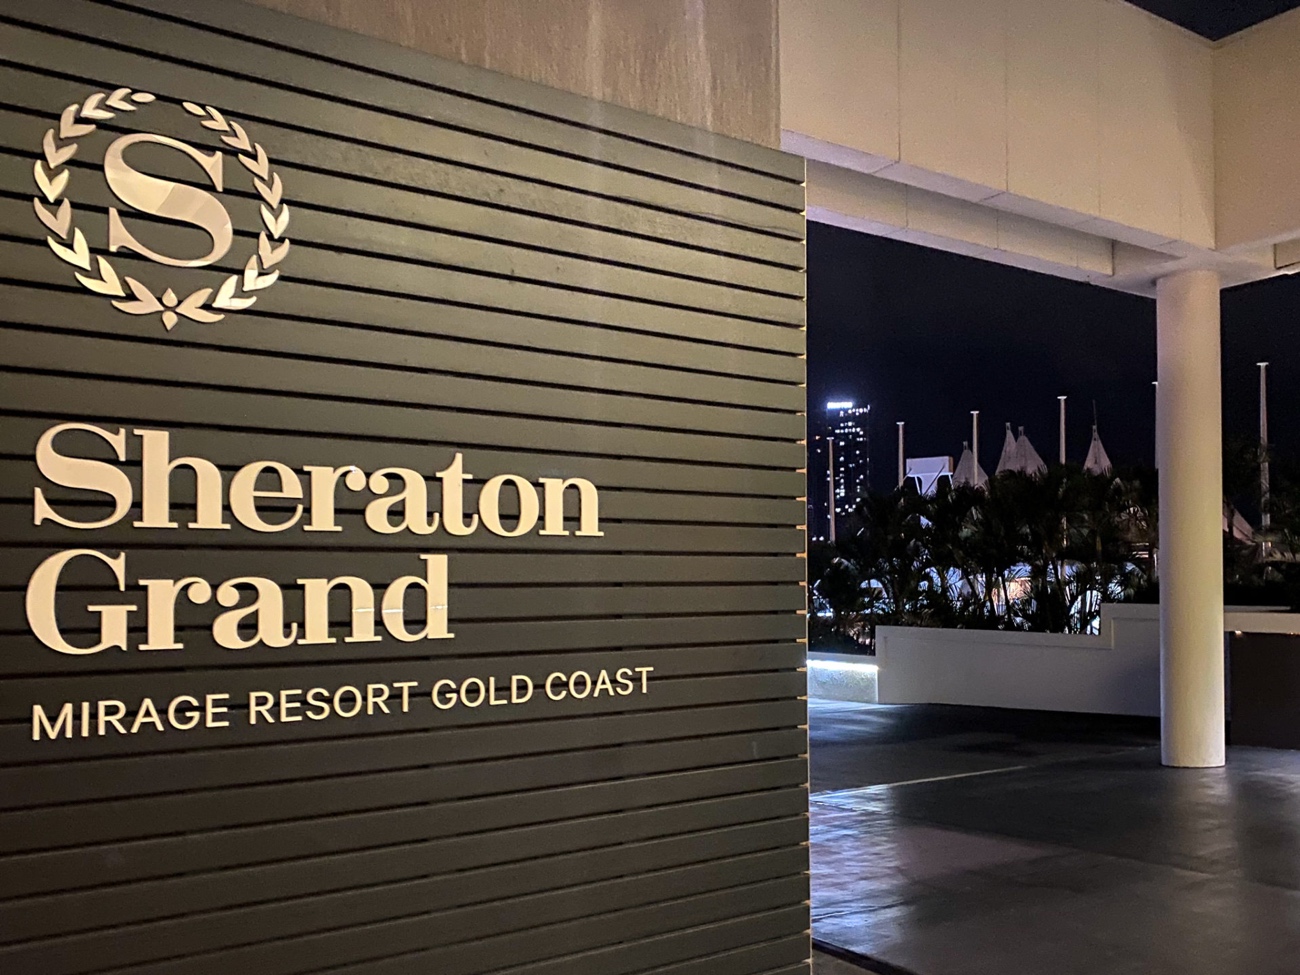 https://www.mundovideo.com.co/europa/star-entertainment-want-to-sell-sheraton-grand-mirage-resort-to-pay-fines